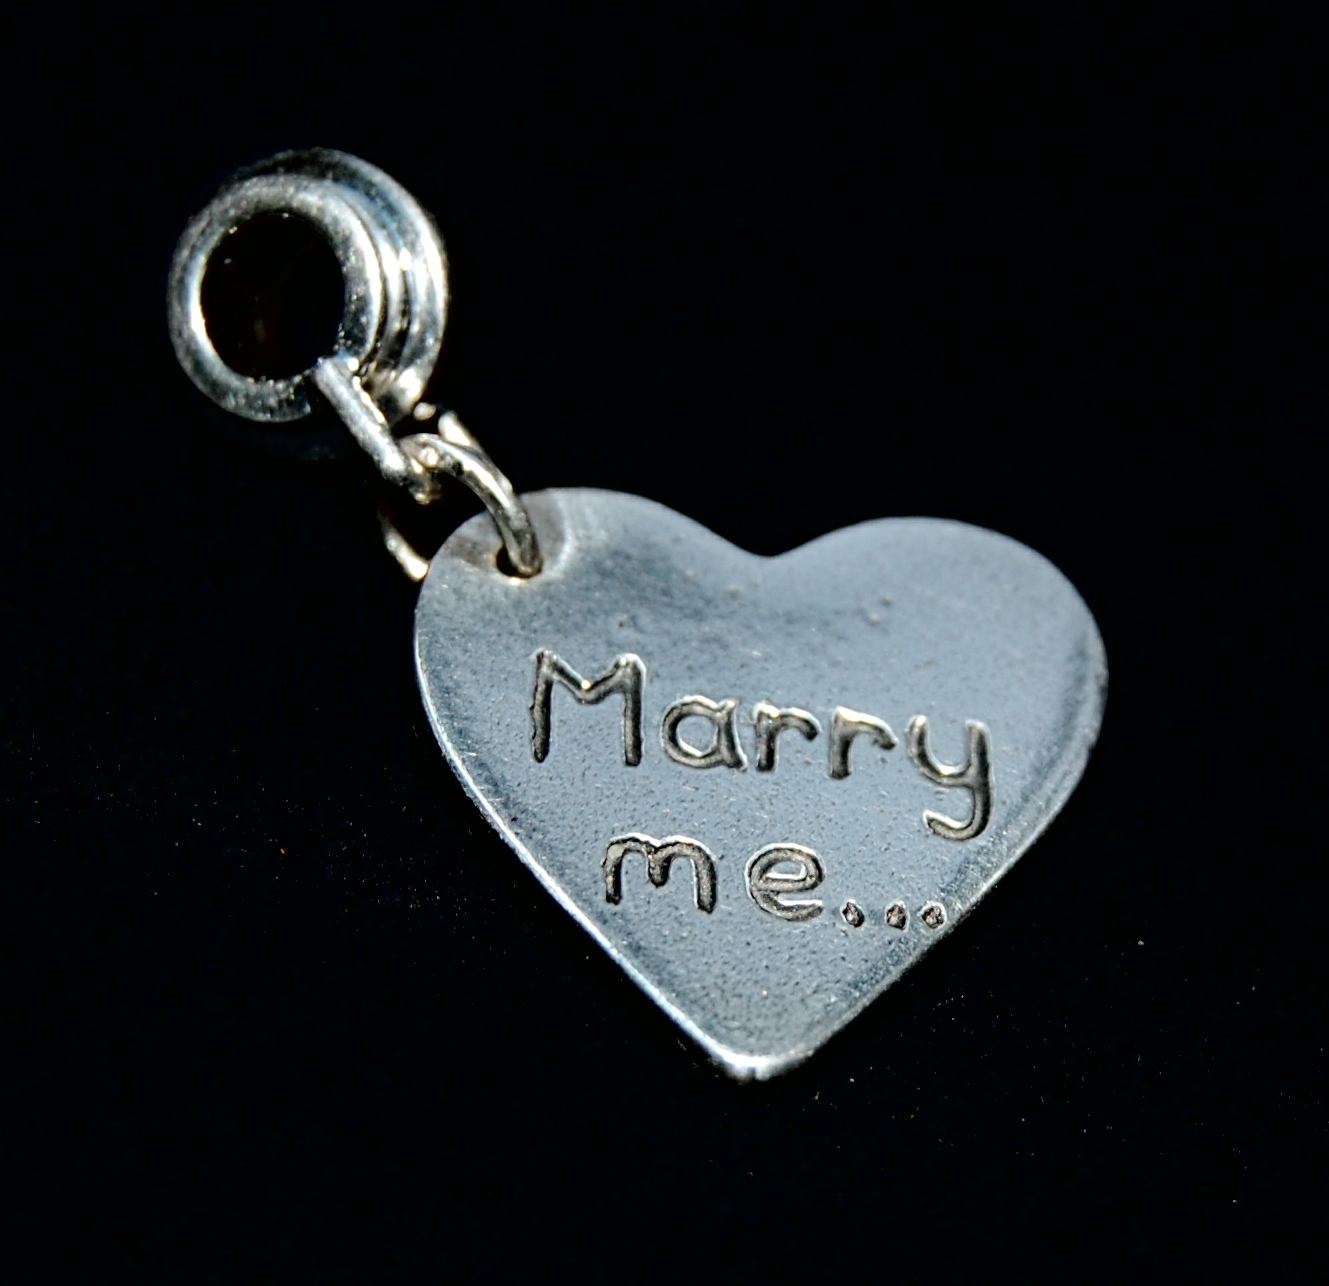 Regular silver heart charm with your chosen message hand inscribed. Presented on a charm carrier, ready to add to your bracelet or necklace.